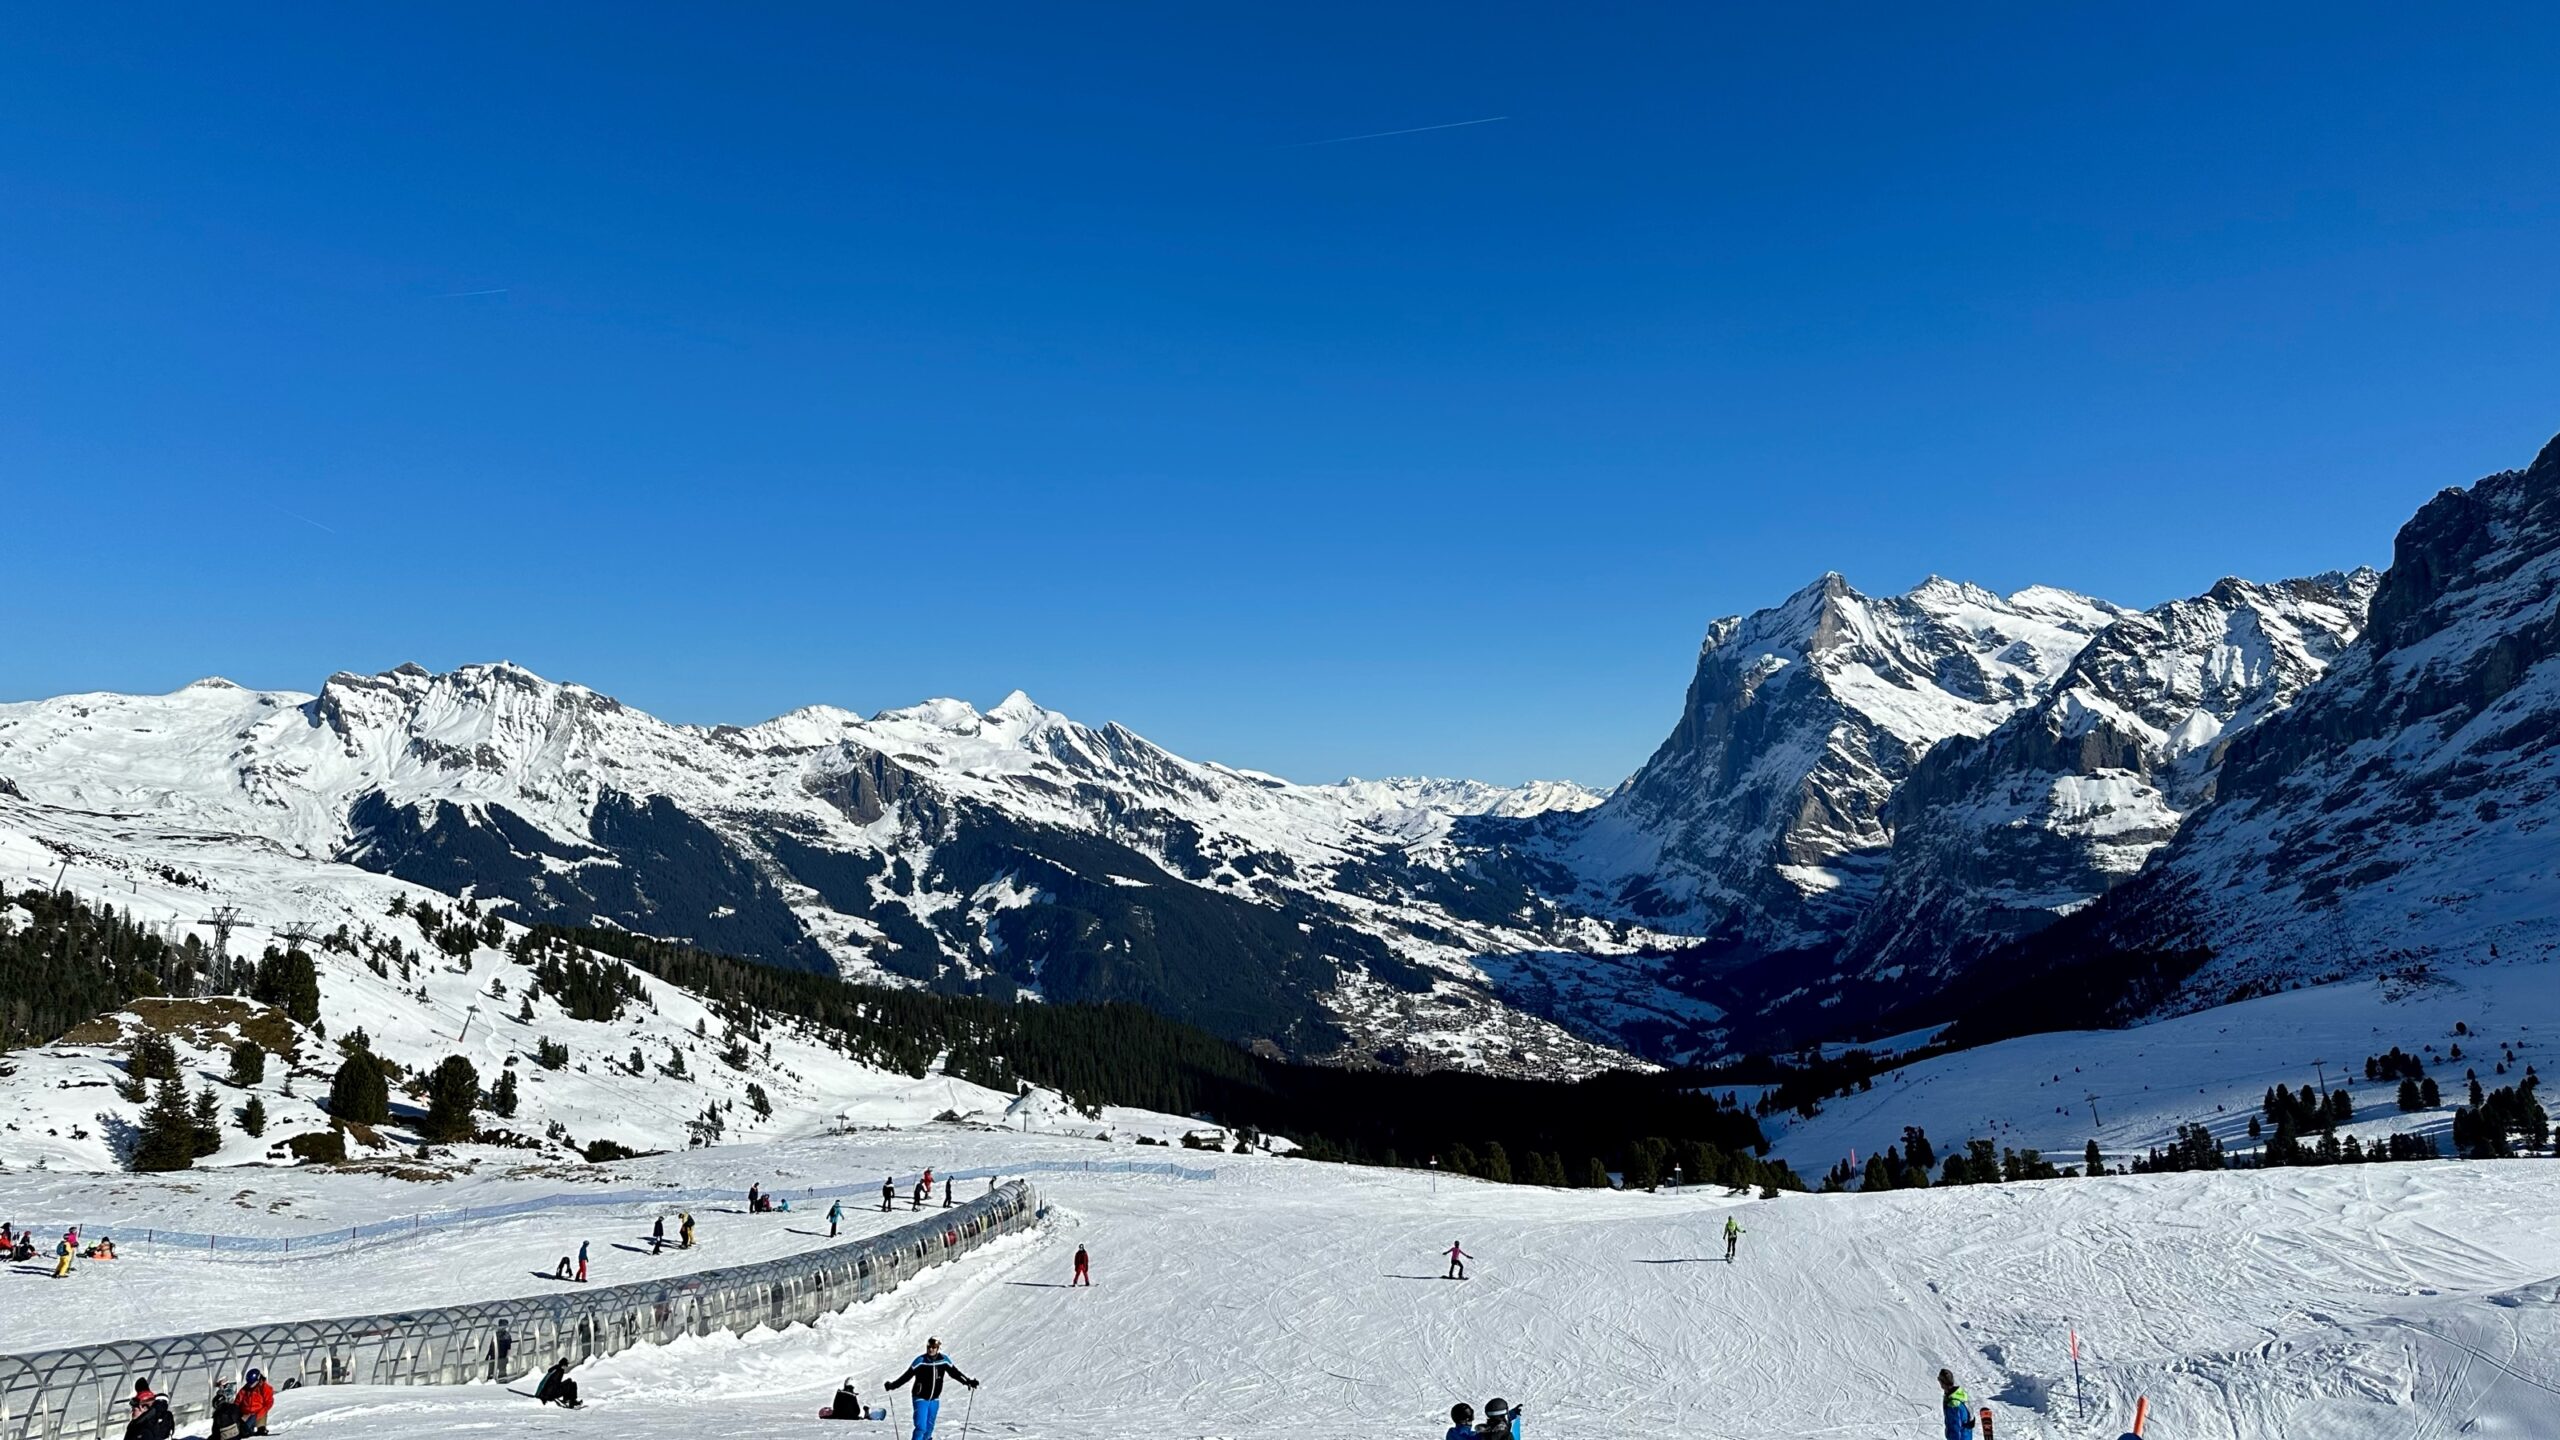 A wide, groomed ski piste against a backdrop of snow-covered mountains under a clear blue sky.